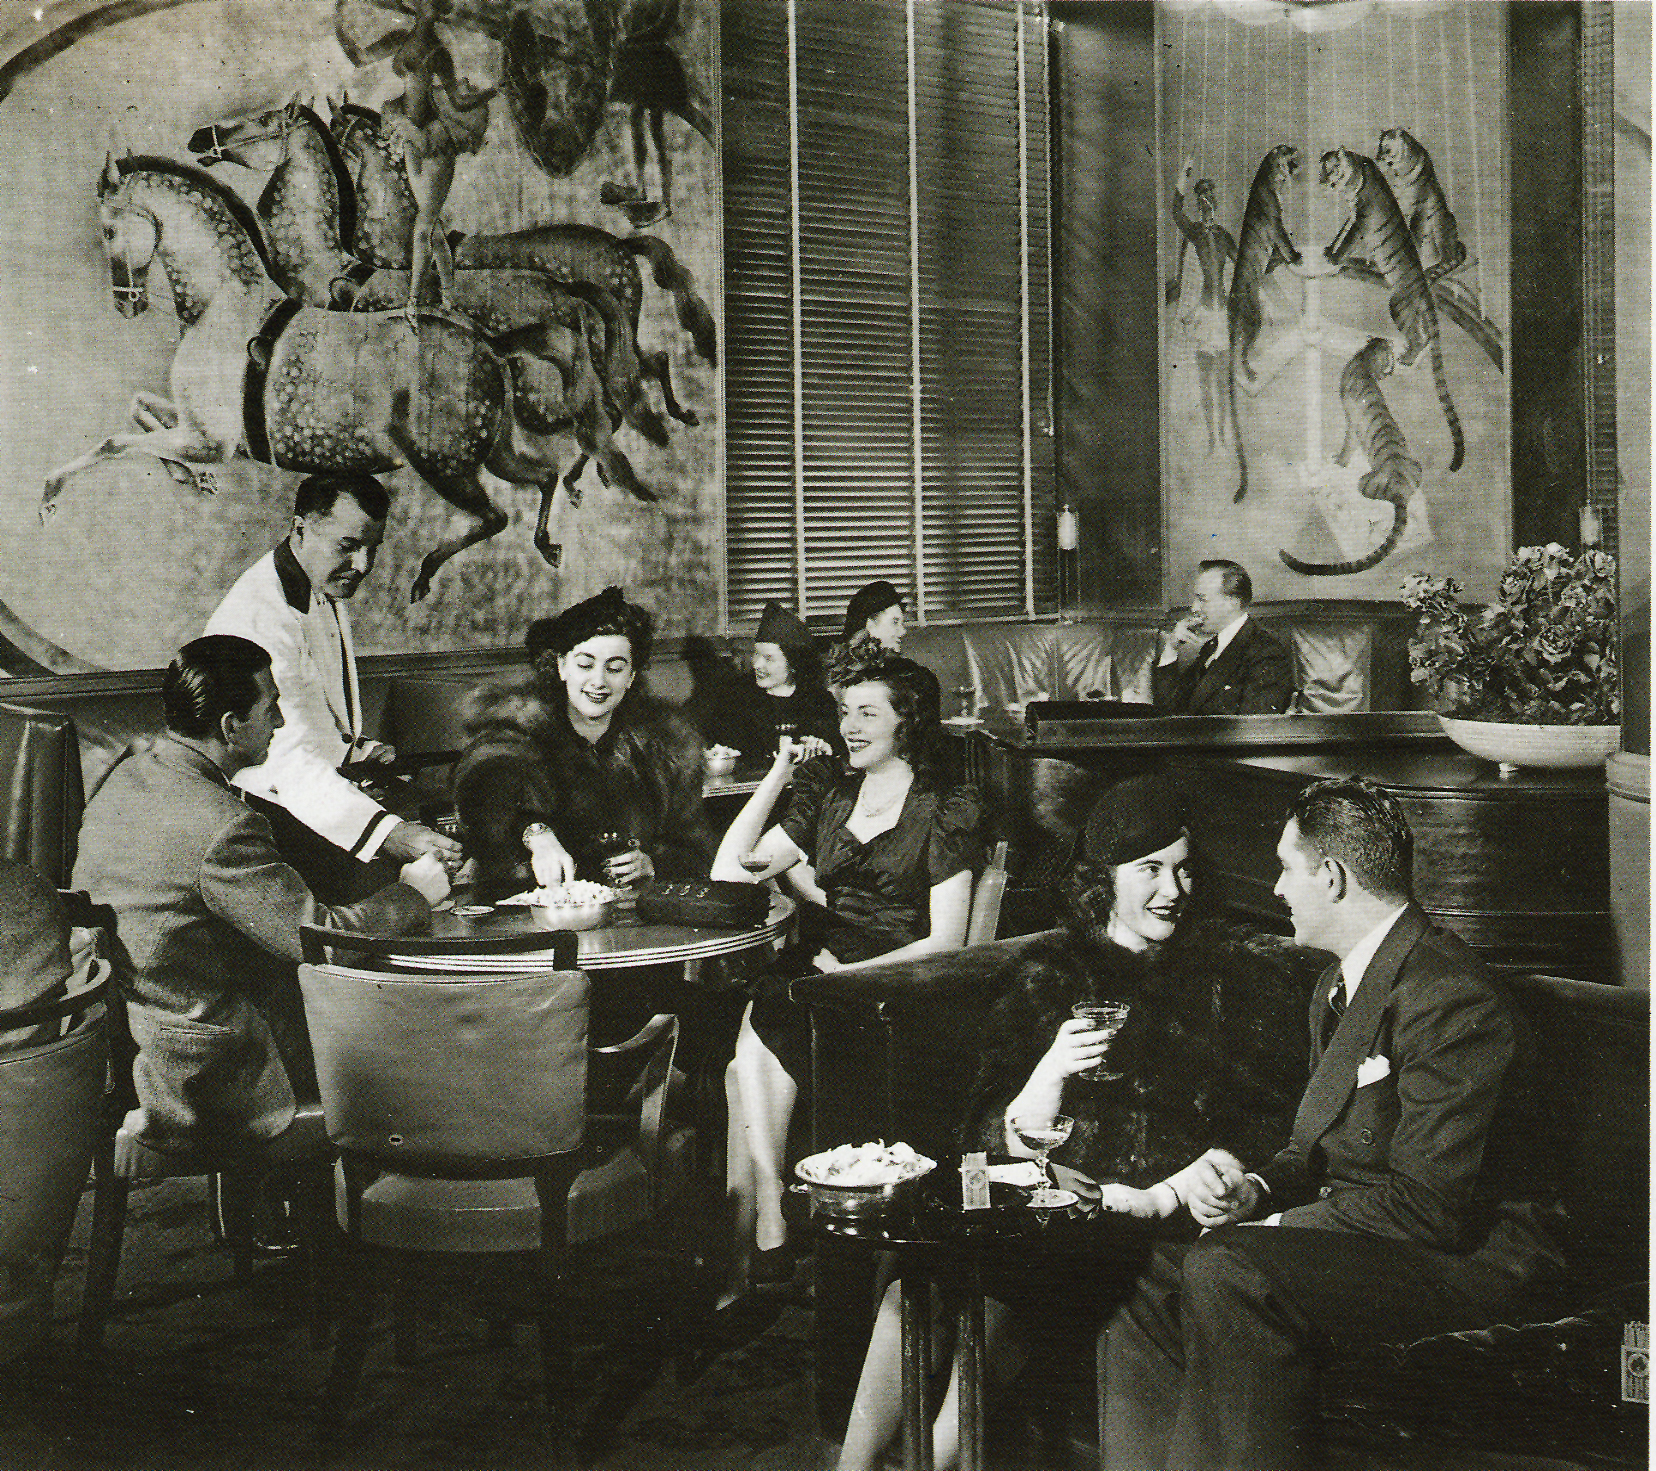 People lounging in a ornate room while drinking cocktails.